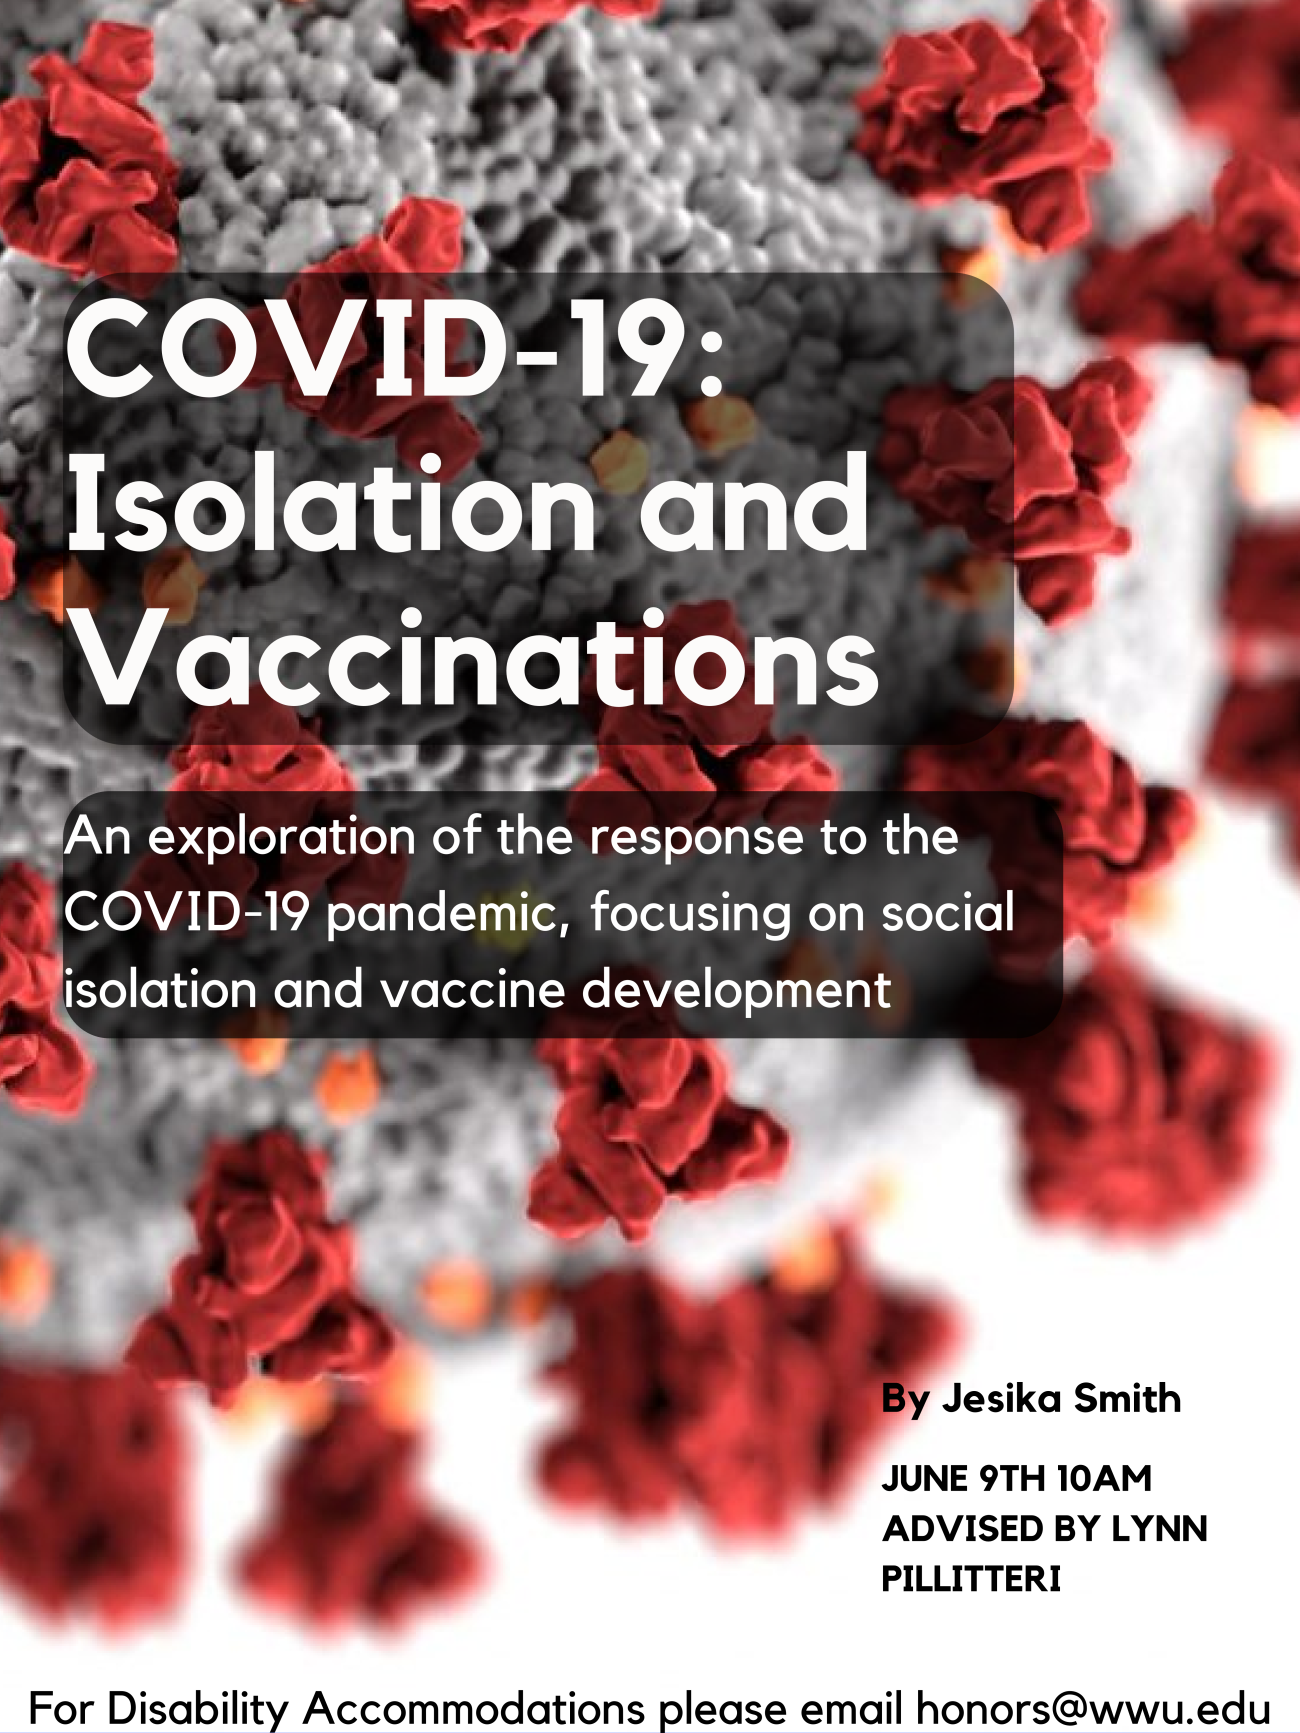 A close up image of a coronavirus particle: a gray sphere with red spiky protrusions. Text reads: “COVID-19: Isolation and Vaccinations” “An exploration of the response to the COVID-19 pandemic, focusing on social isolation and vaccine development” “By Jesika Smith, June 9th 10AM, Advised by Lynn Pillitteri” “For Disability Accommodations please email honors@wwu.edu”